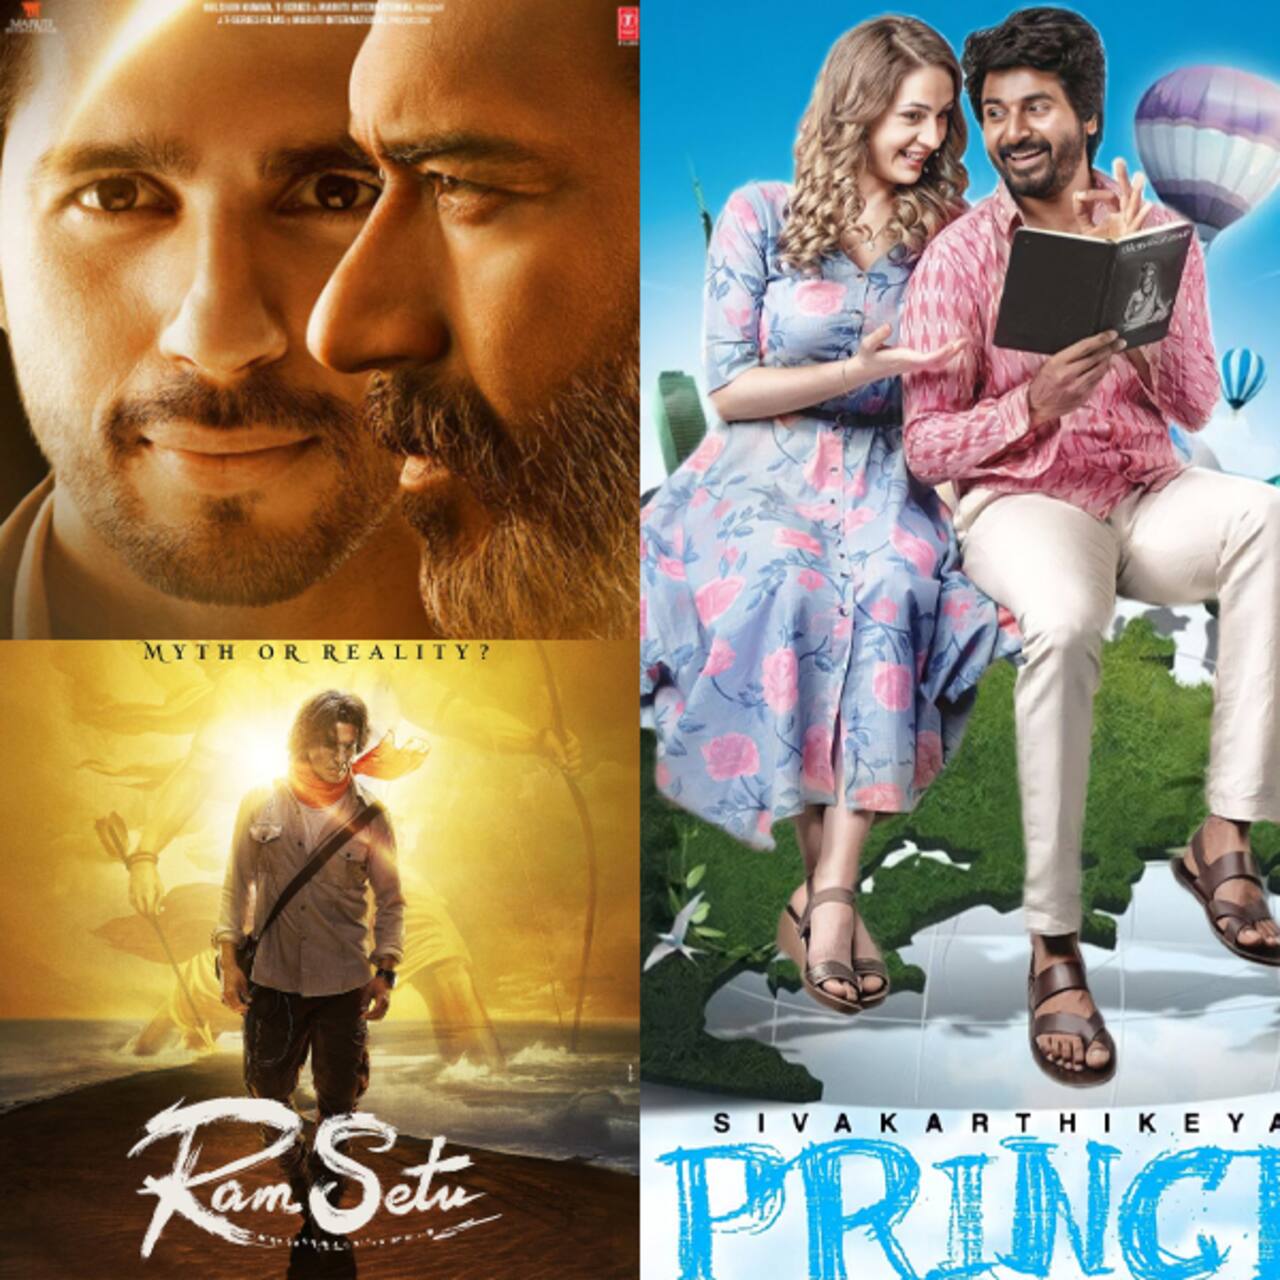 Ajay Devgn's Thank God, Akshay Kumar's Ram Setu, Sivakarthikeyan's Prince  and more Bollywood and South movies set to light up Diwali in theatres